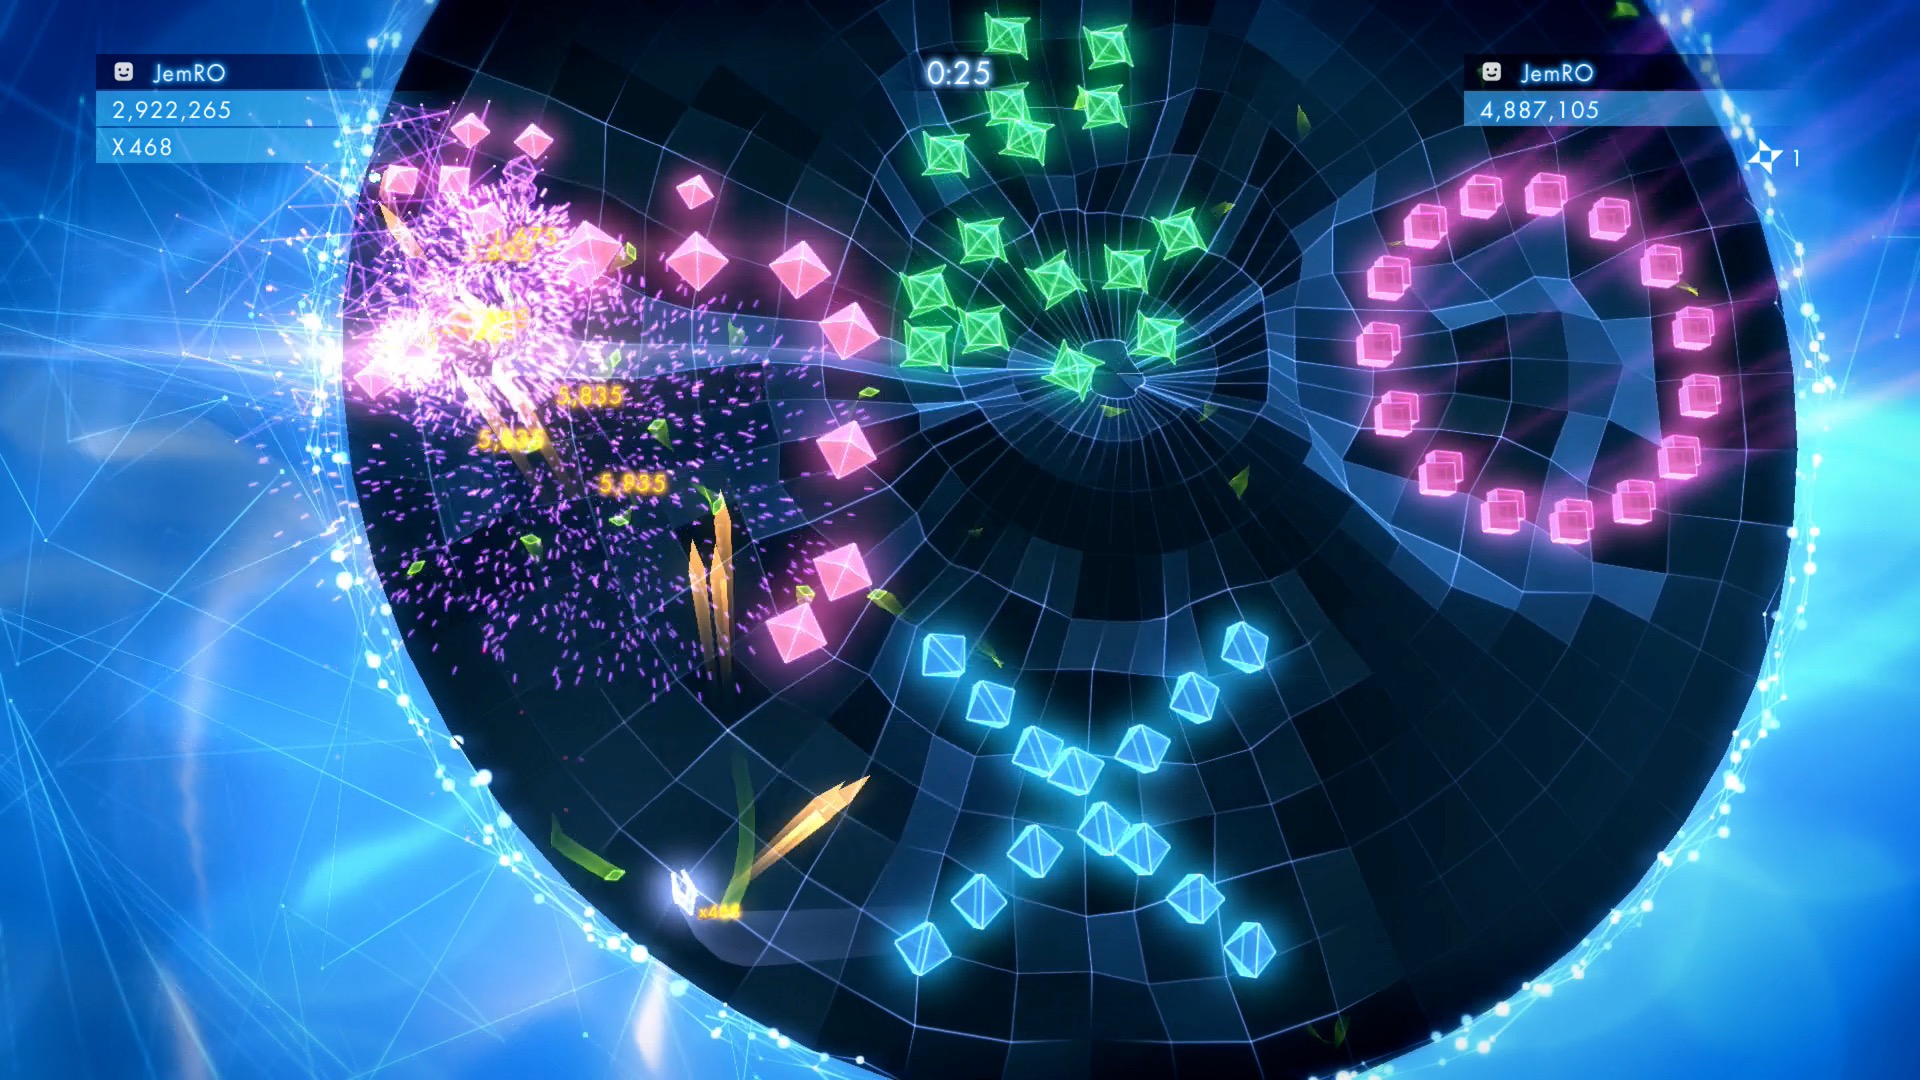 geometry wars 3 dimensions evolved trophy guide